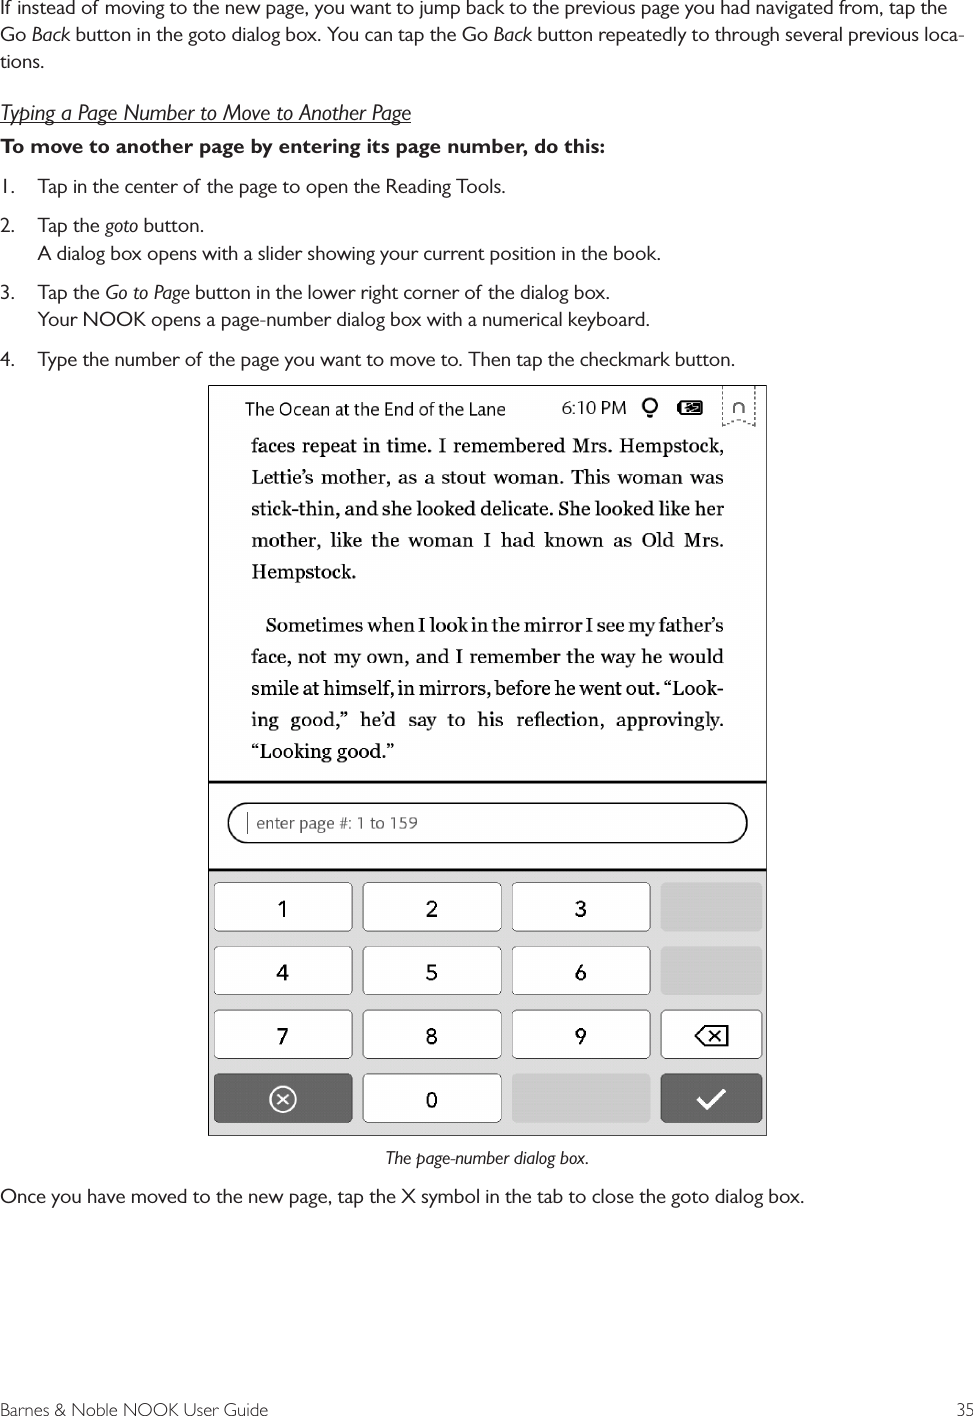 Barnes &amp; Noble NOOK User Guide  35If instead of moving to the new page, you want to jump back to the previous page you had navigated from, tap the Go Back button in the goto dialog box. You can tap the Go Back button repeatedly to through several previous loca-tions.Typing a Page Number to Move to Another PageTo move to another page by entering its page number, do this:1. Tap in the center of the page to open the Reading Tools.2. Tap the goto button.A dialog box opens with a slider showing your current position in the book.3. Tap the Go to Page button in the lower right corner of the dialog box.Your NOOK opens a page-number dialog box with a numerical keyboard.4. Type the number of the page you want to move to. Then tap the checkmark button.The page-number dialog box.Once you have moved to the new page, tap the X symbol in the tab to close the goto dialog box.